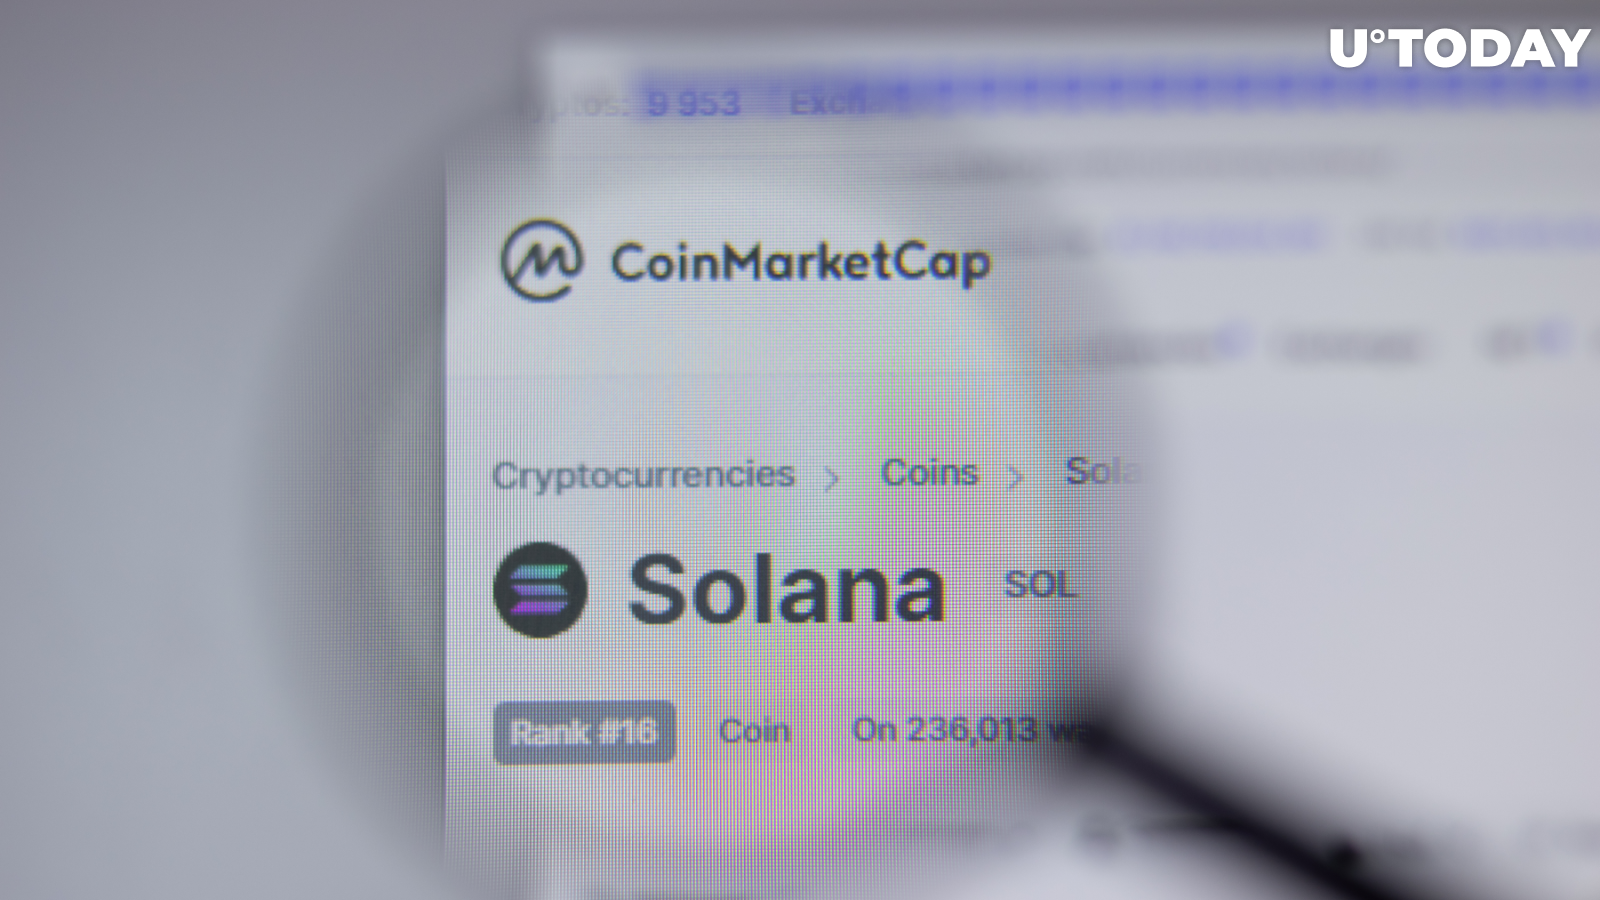 Solana (SOL) Remains Huge, This Data Confirms It